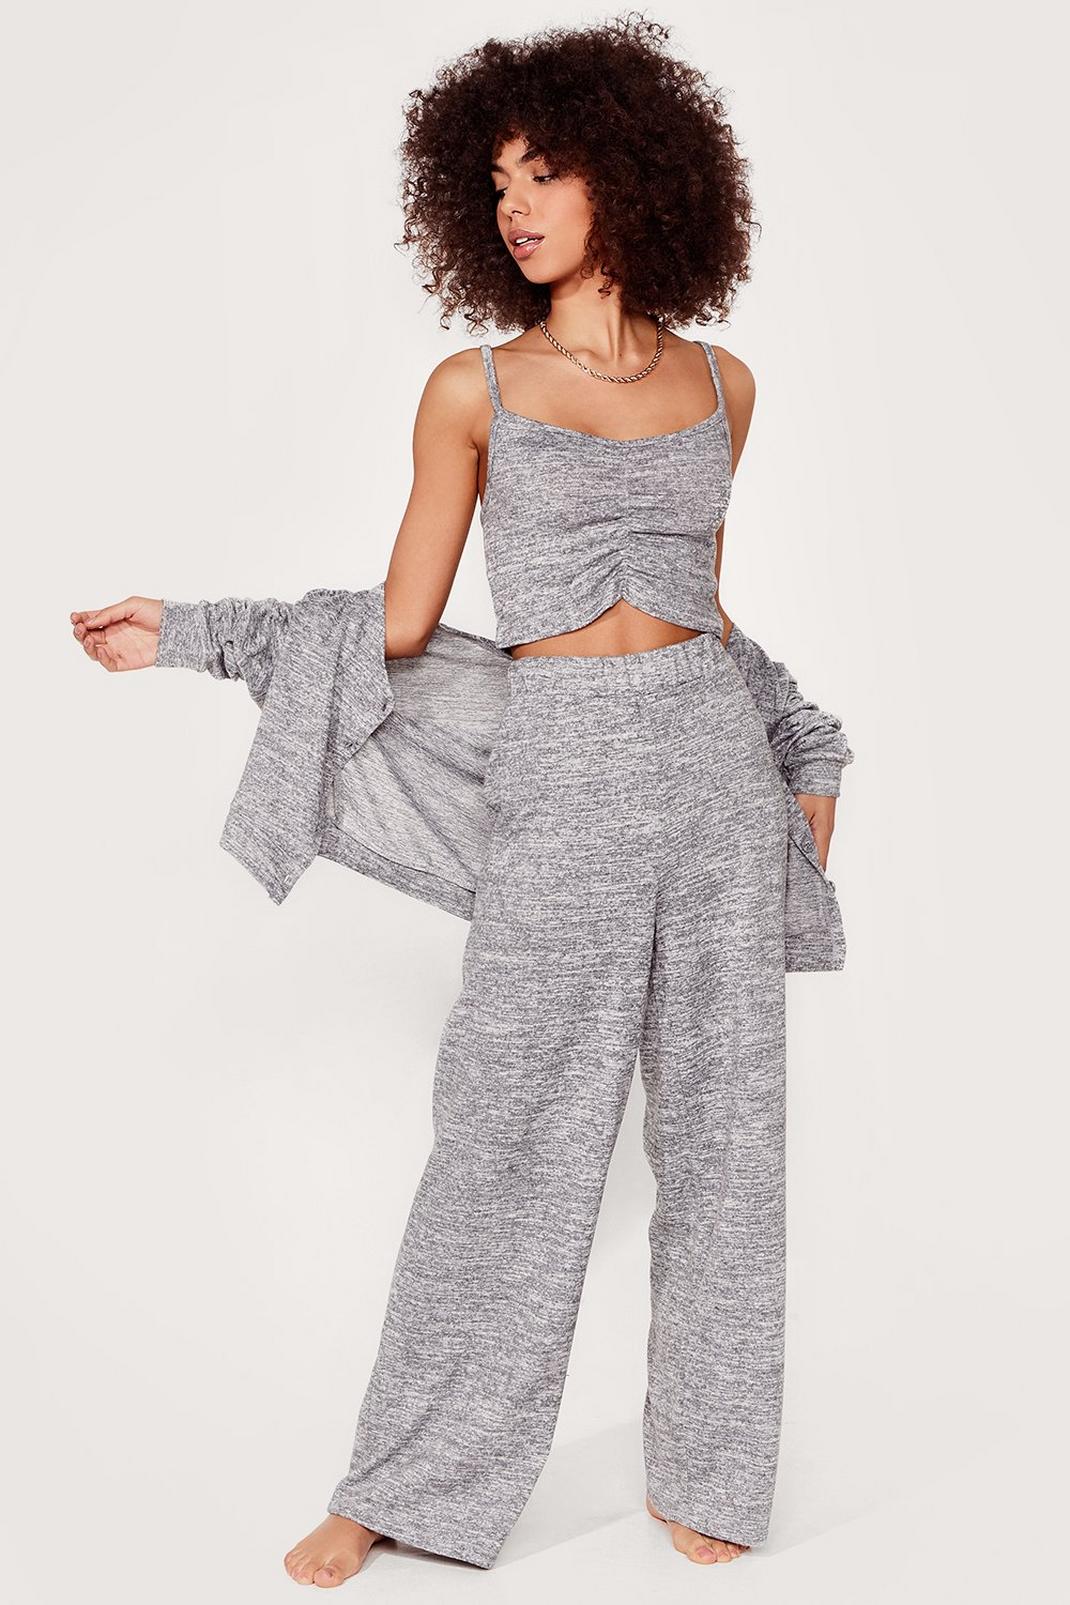 Grey marl Marl Top Cardigan and Trousers Loungewear Set image number 1